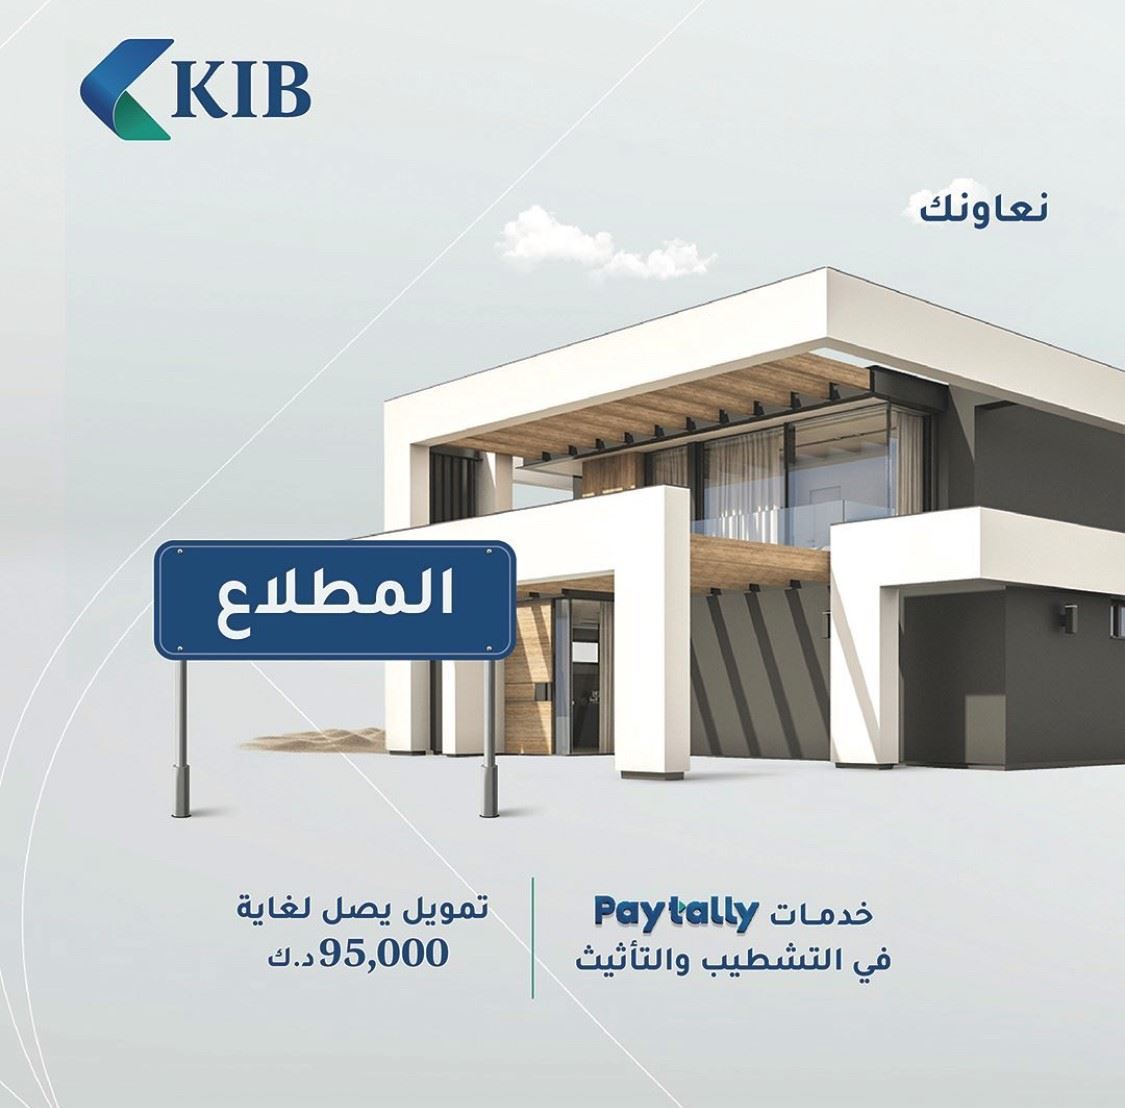 KIB offers tailored financing solutions for Mutlaa Residents